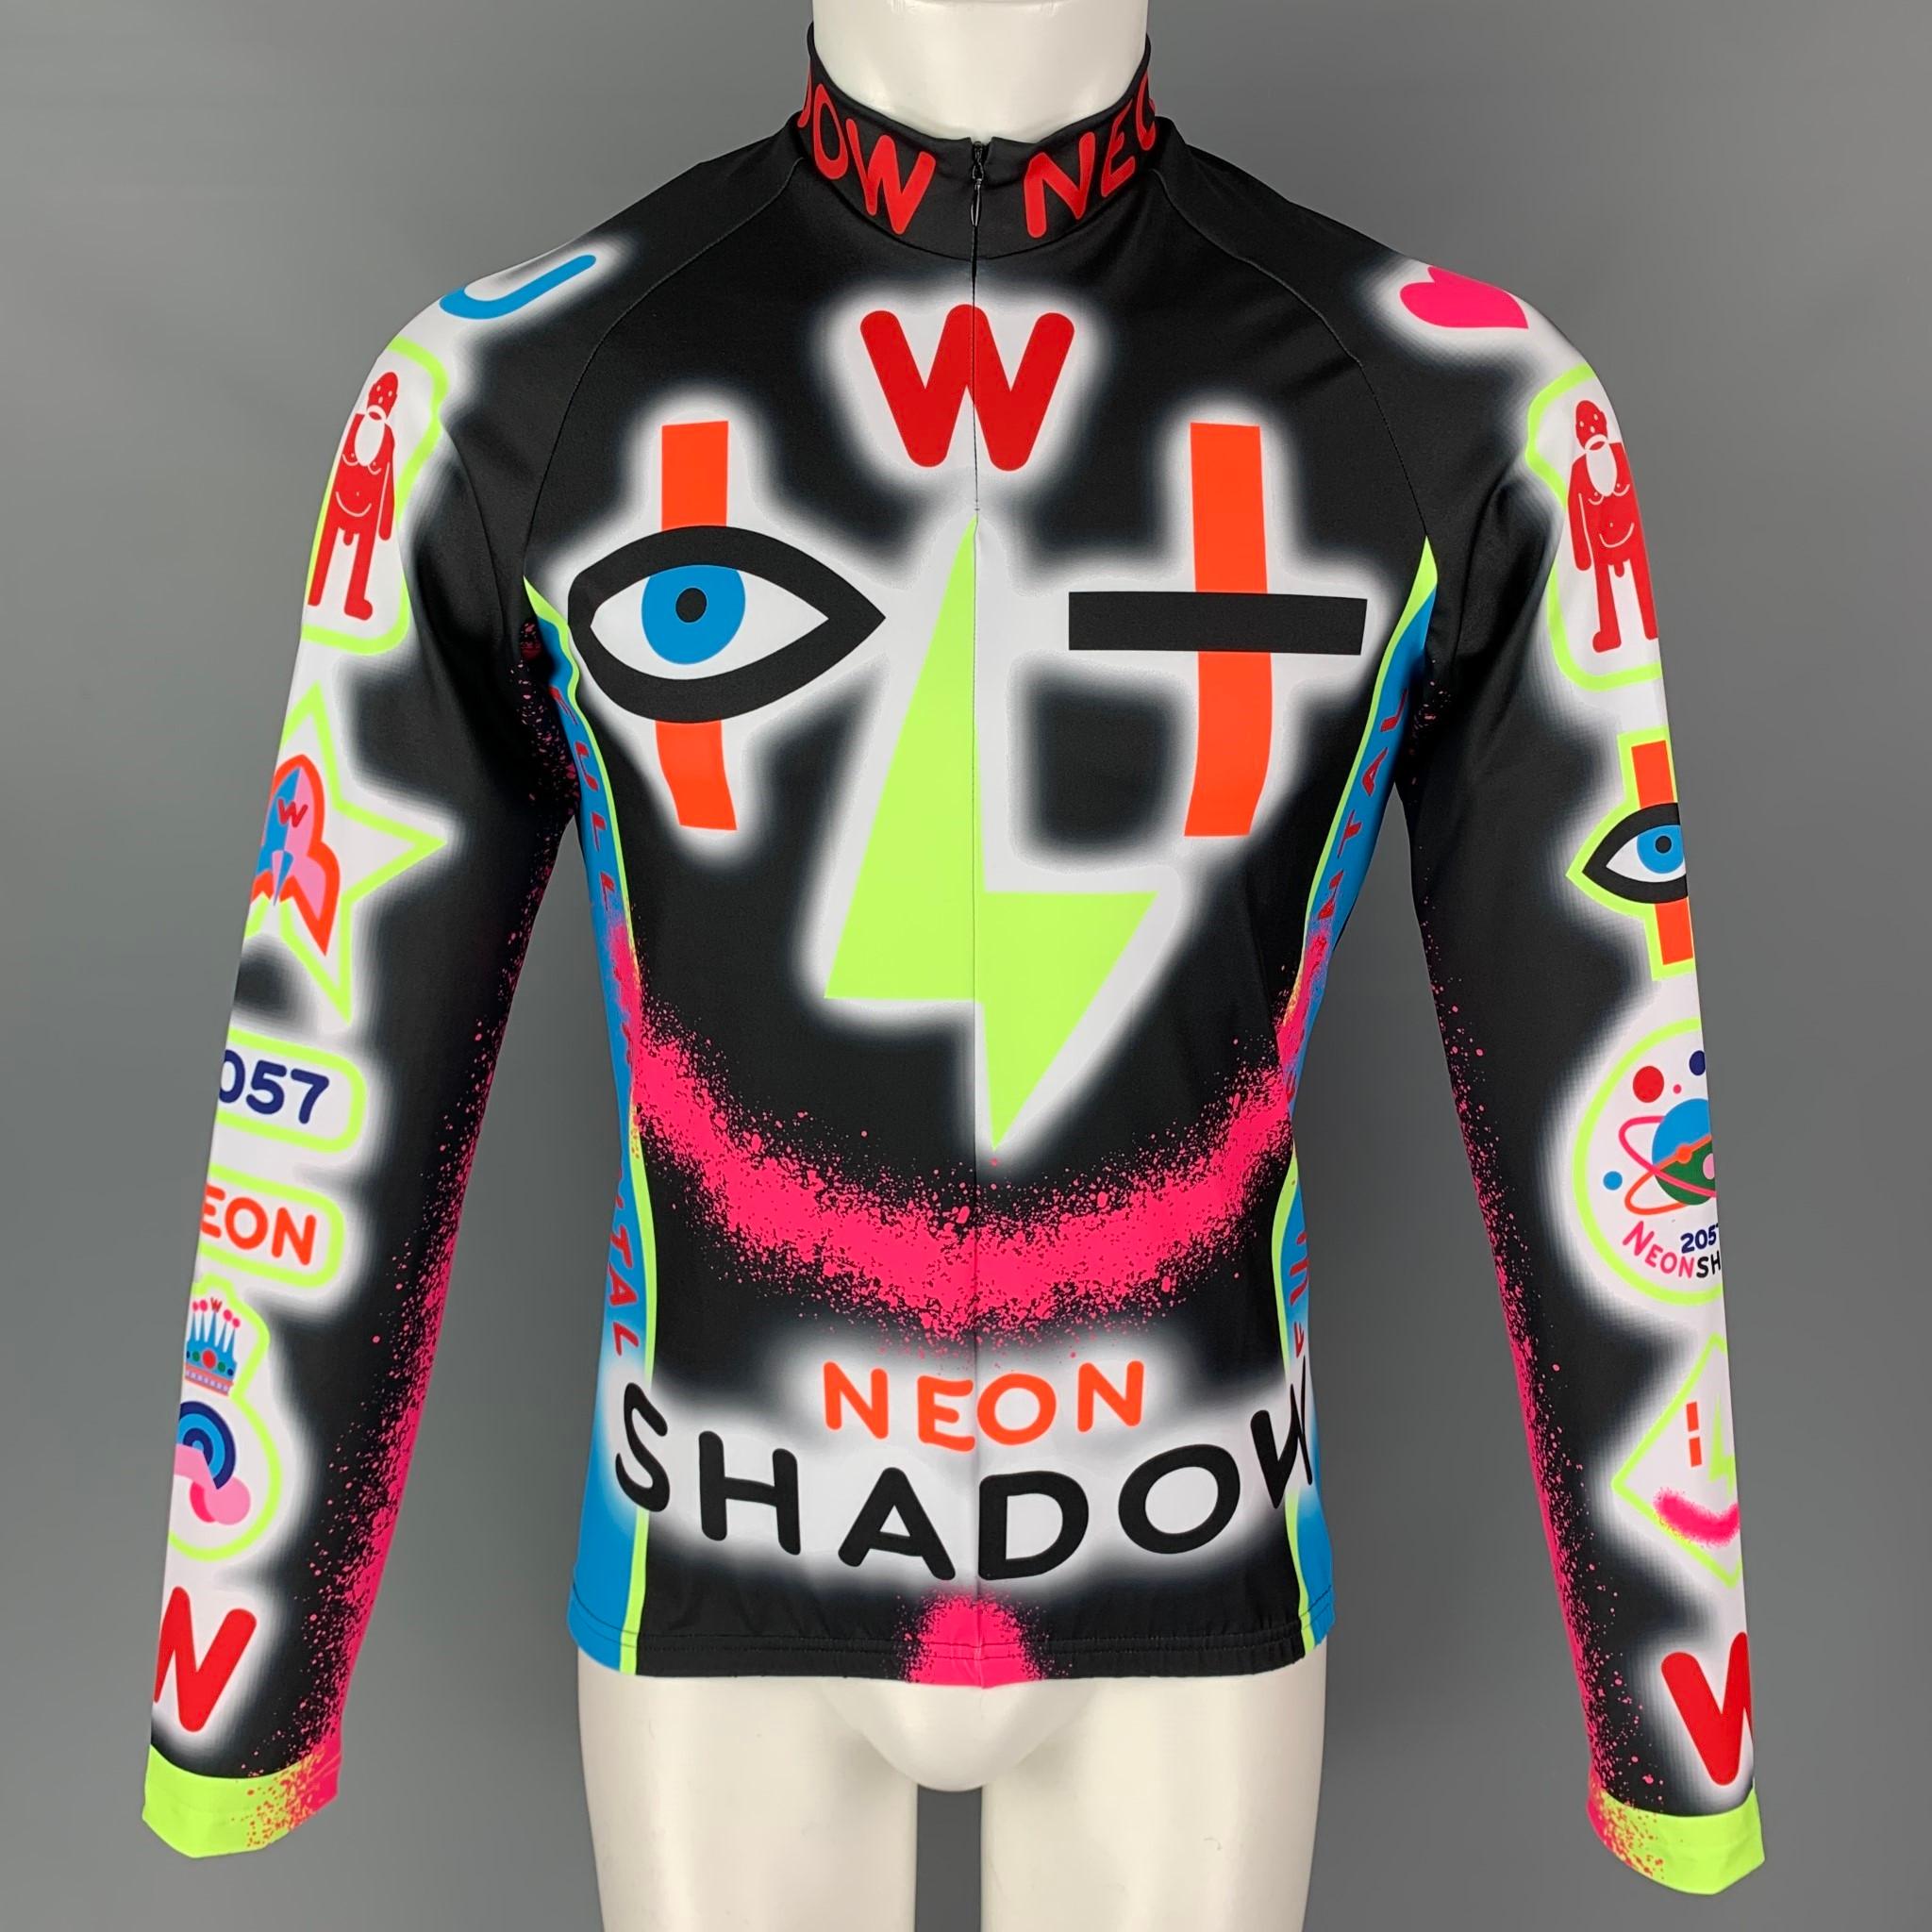 Walter Van Beirendonck Cycle Biker Jersey Pullover Top from Spring Summer 2022 Neon Shadow collection. Features a quarter zip graphic print design, collar and back pockets.

Introduced as part of Walter Van Beirendonck’s W< collections during the